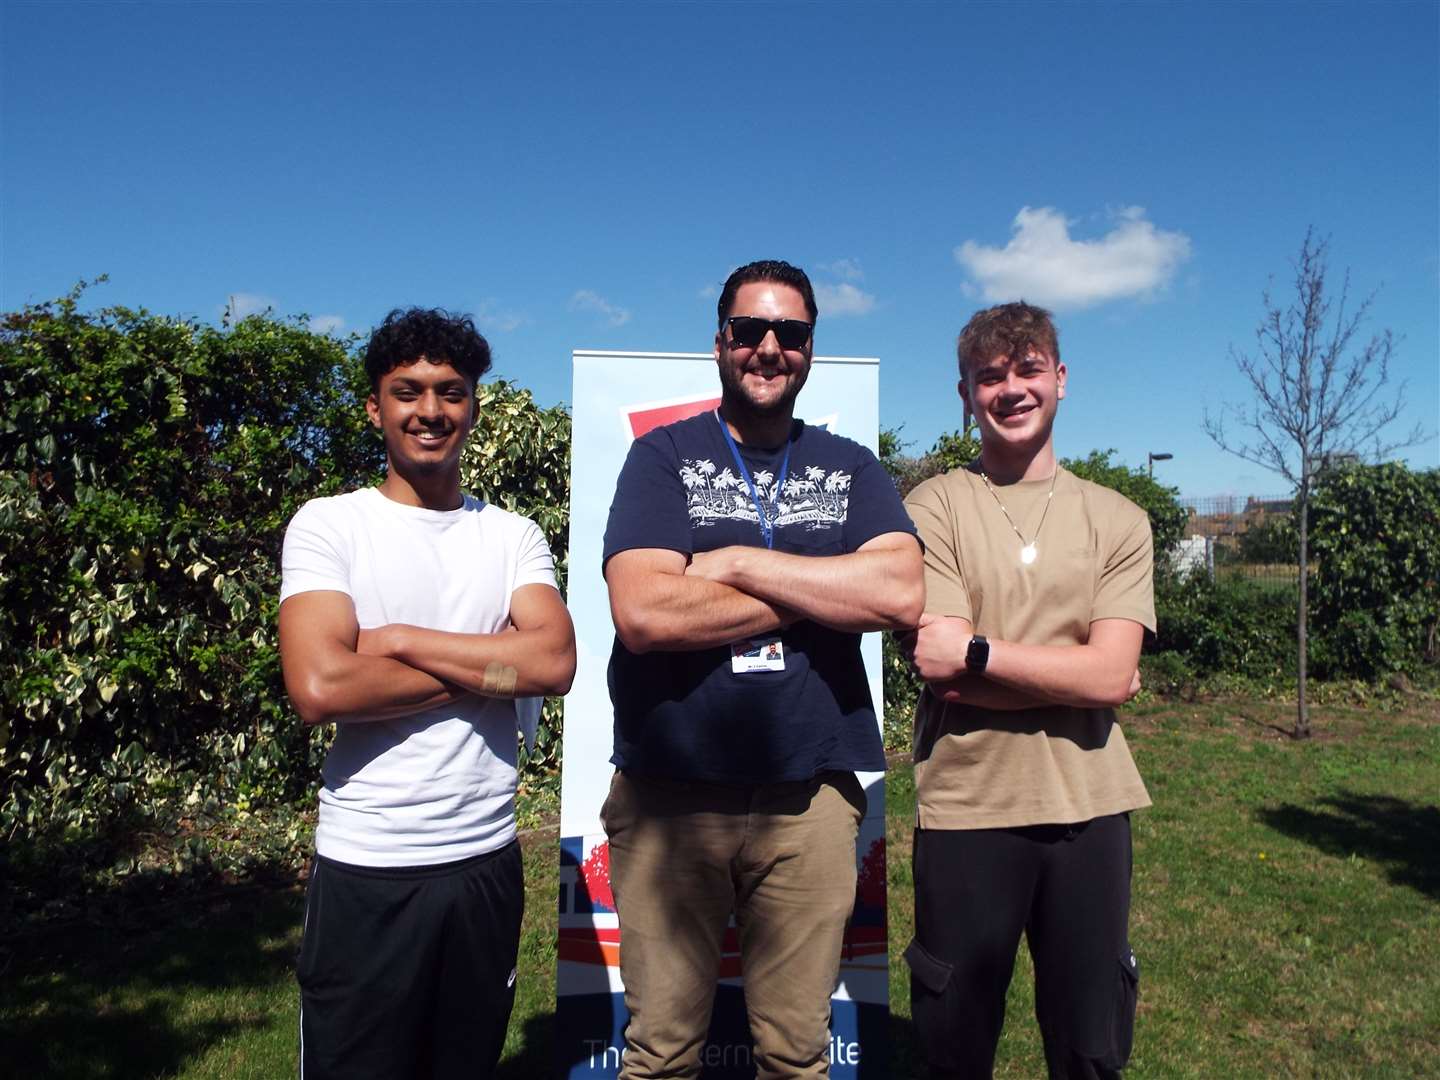 Best friends Shax Islam and Vinnie Palmer, pictured with teacher Stevielee Cairn, are heading to Brighton to study business management and finance after getting their results at the oasis Academy, Sheppey